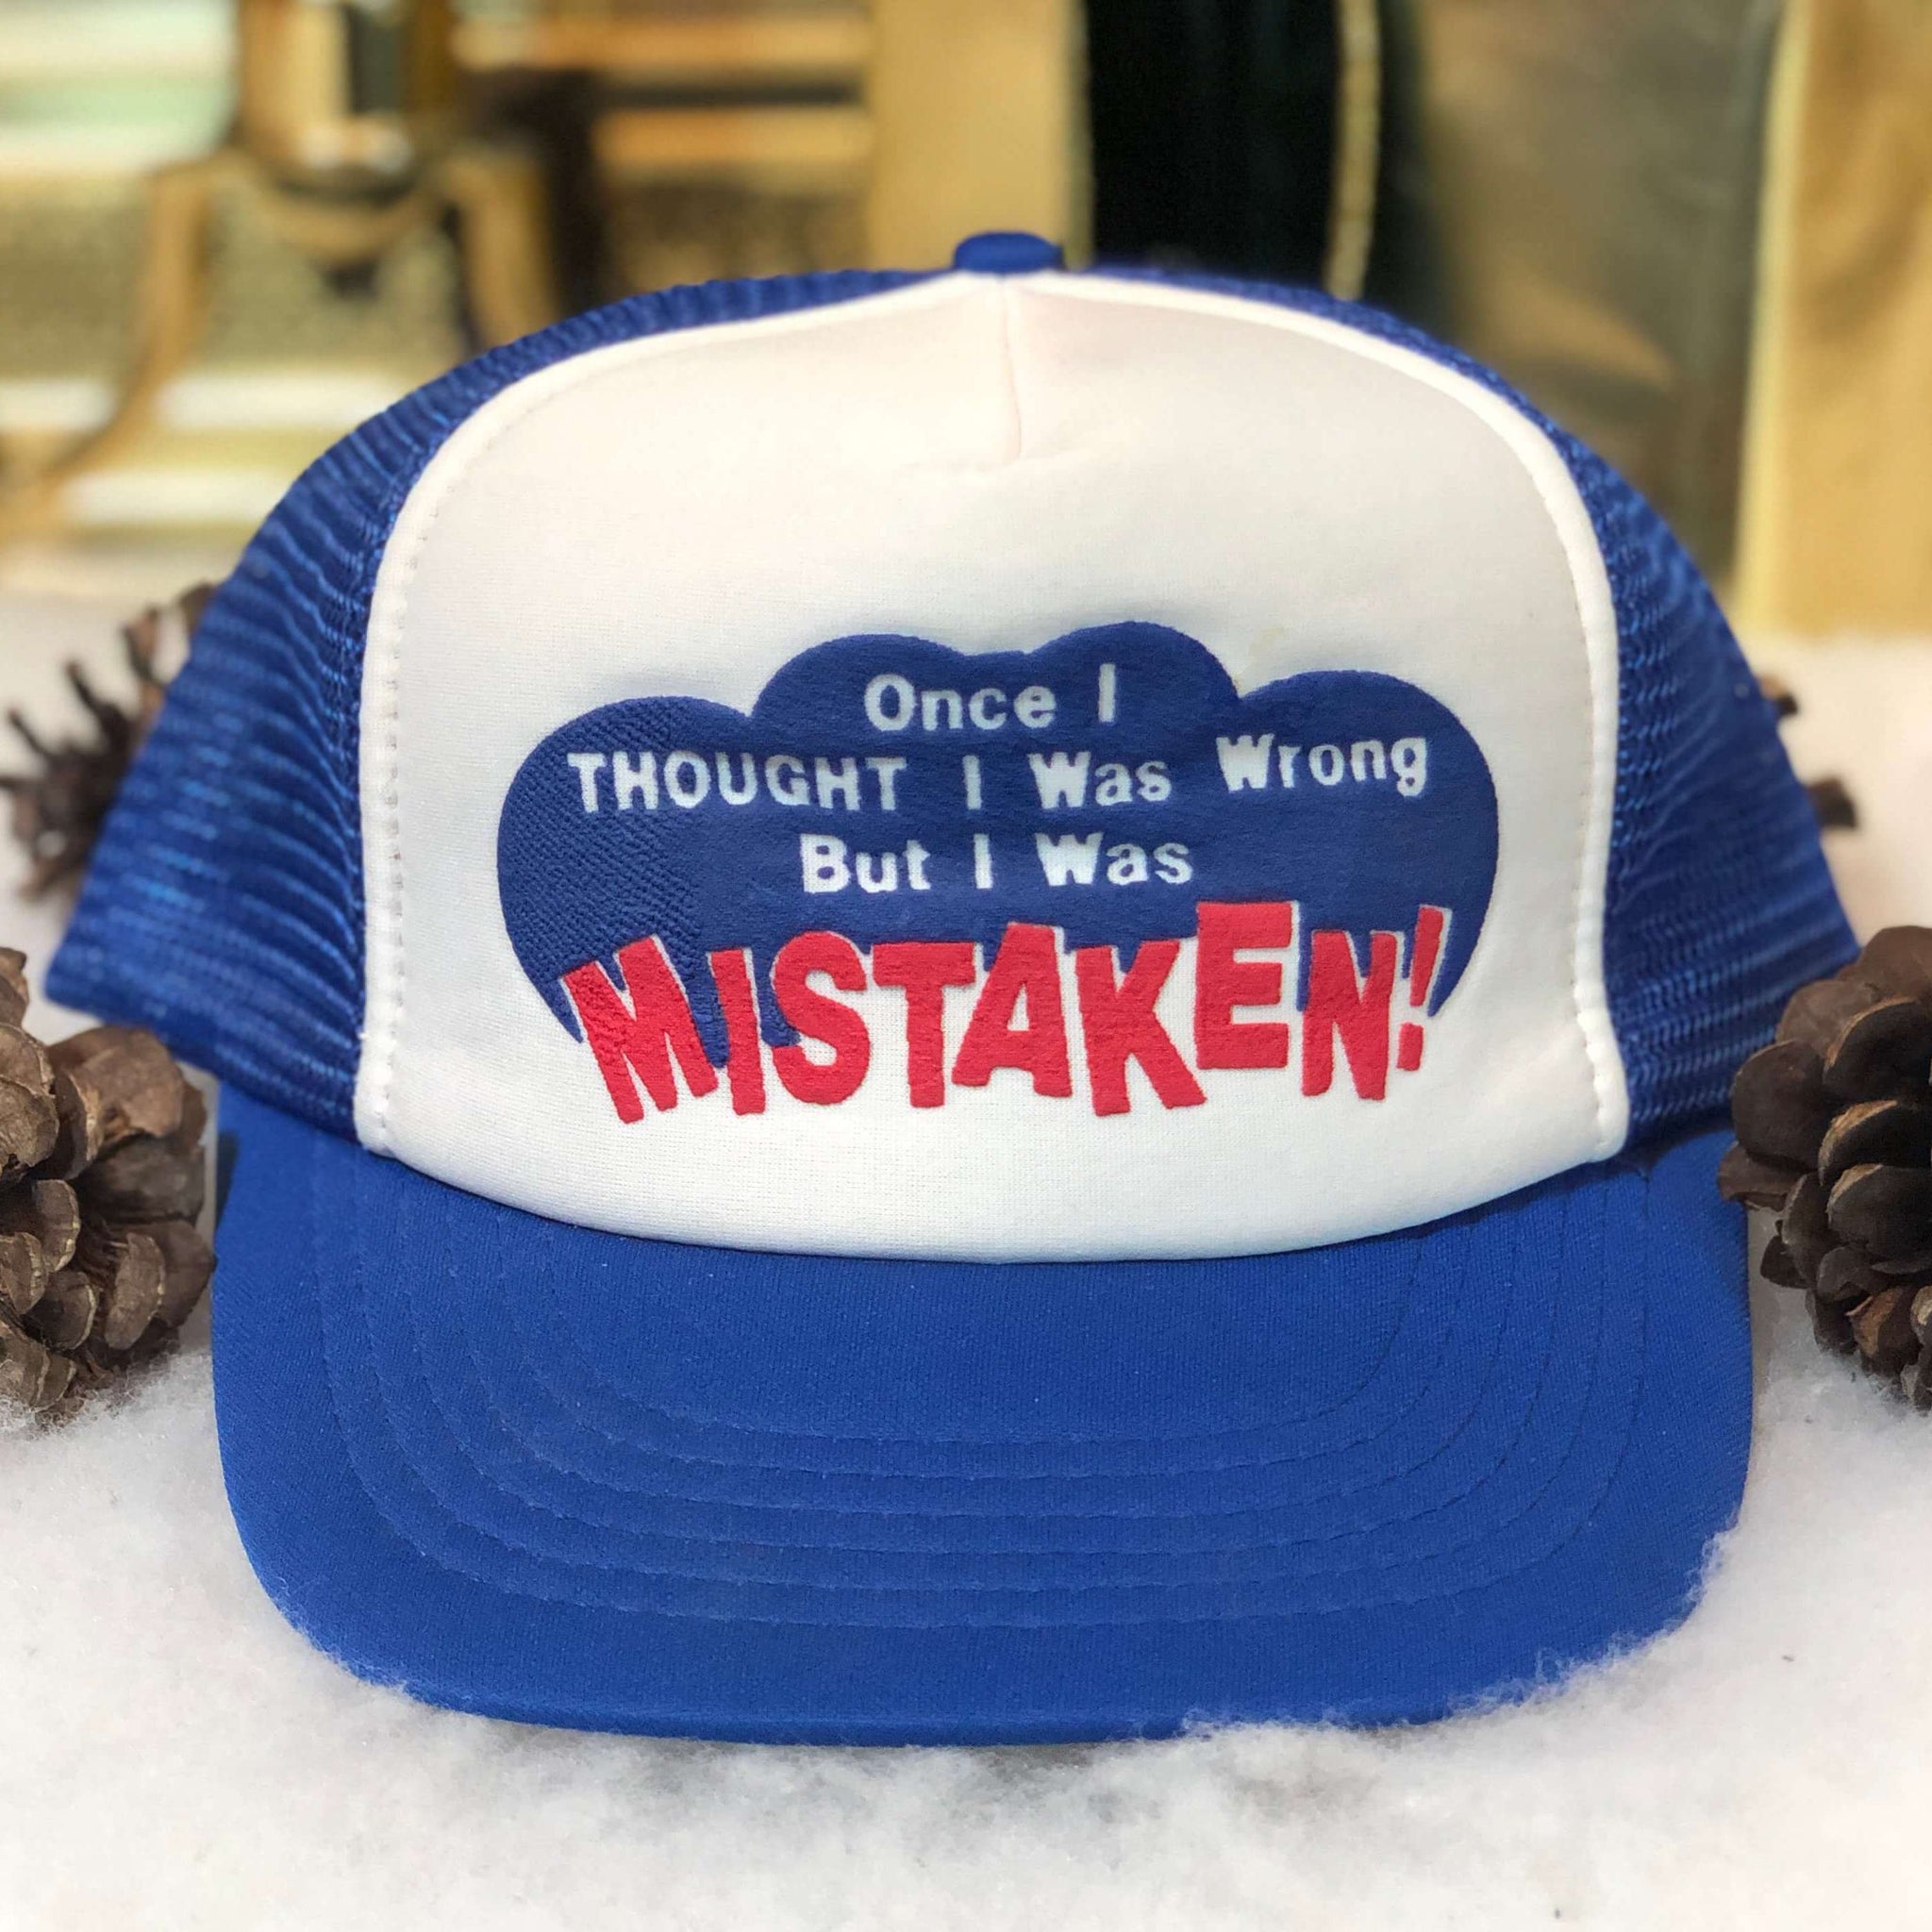 Vintage "Once I Thought I Was Wrong But I Was Mistaken!" Trucker Hat